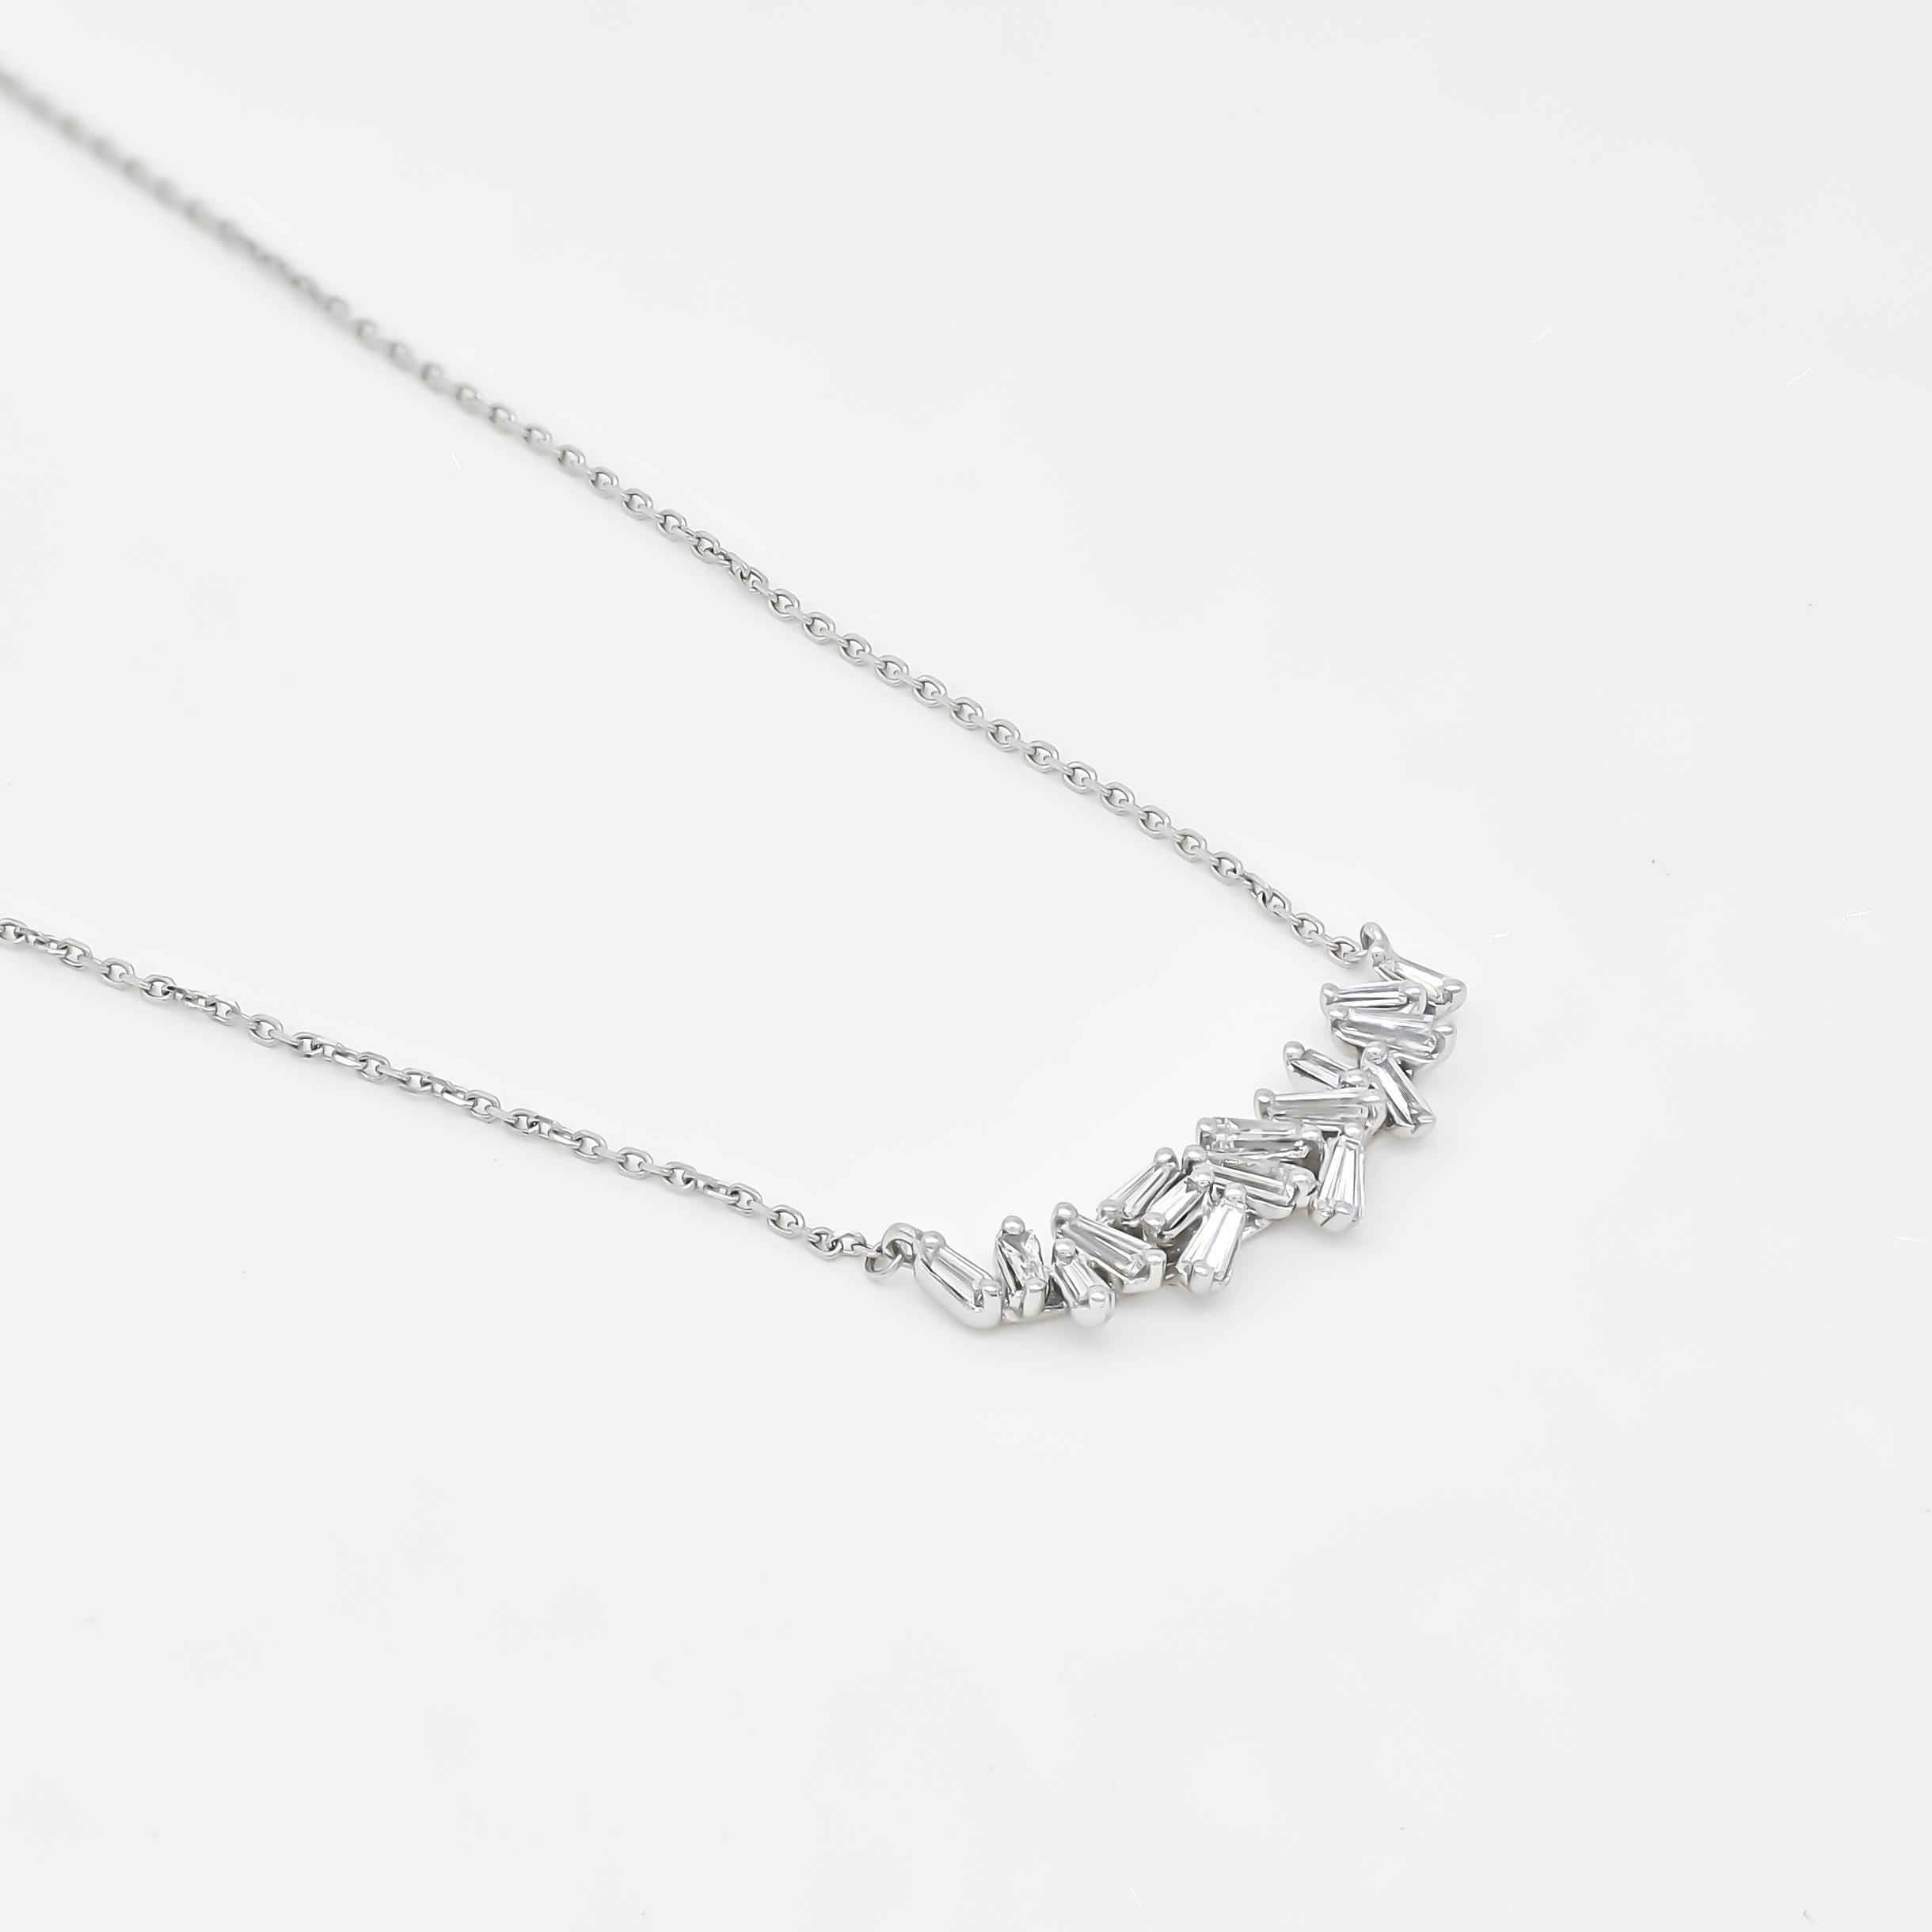 A breathtaking scattered cluster baguette of diamonds in this dramatically beautiful bar pendant necklace .

A Cluster of Baguette diamonds in this bar setting lights up this dramatic cluster pendant necklace.

Spoil her with sparkle. This elegant